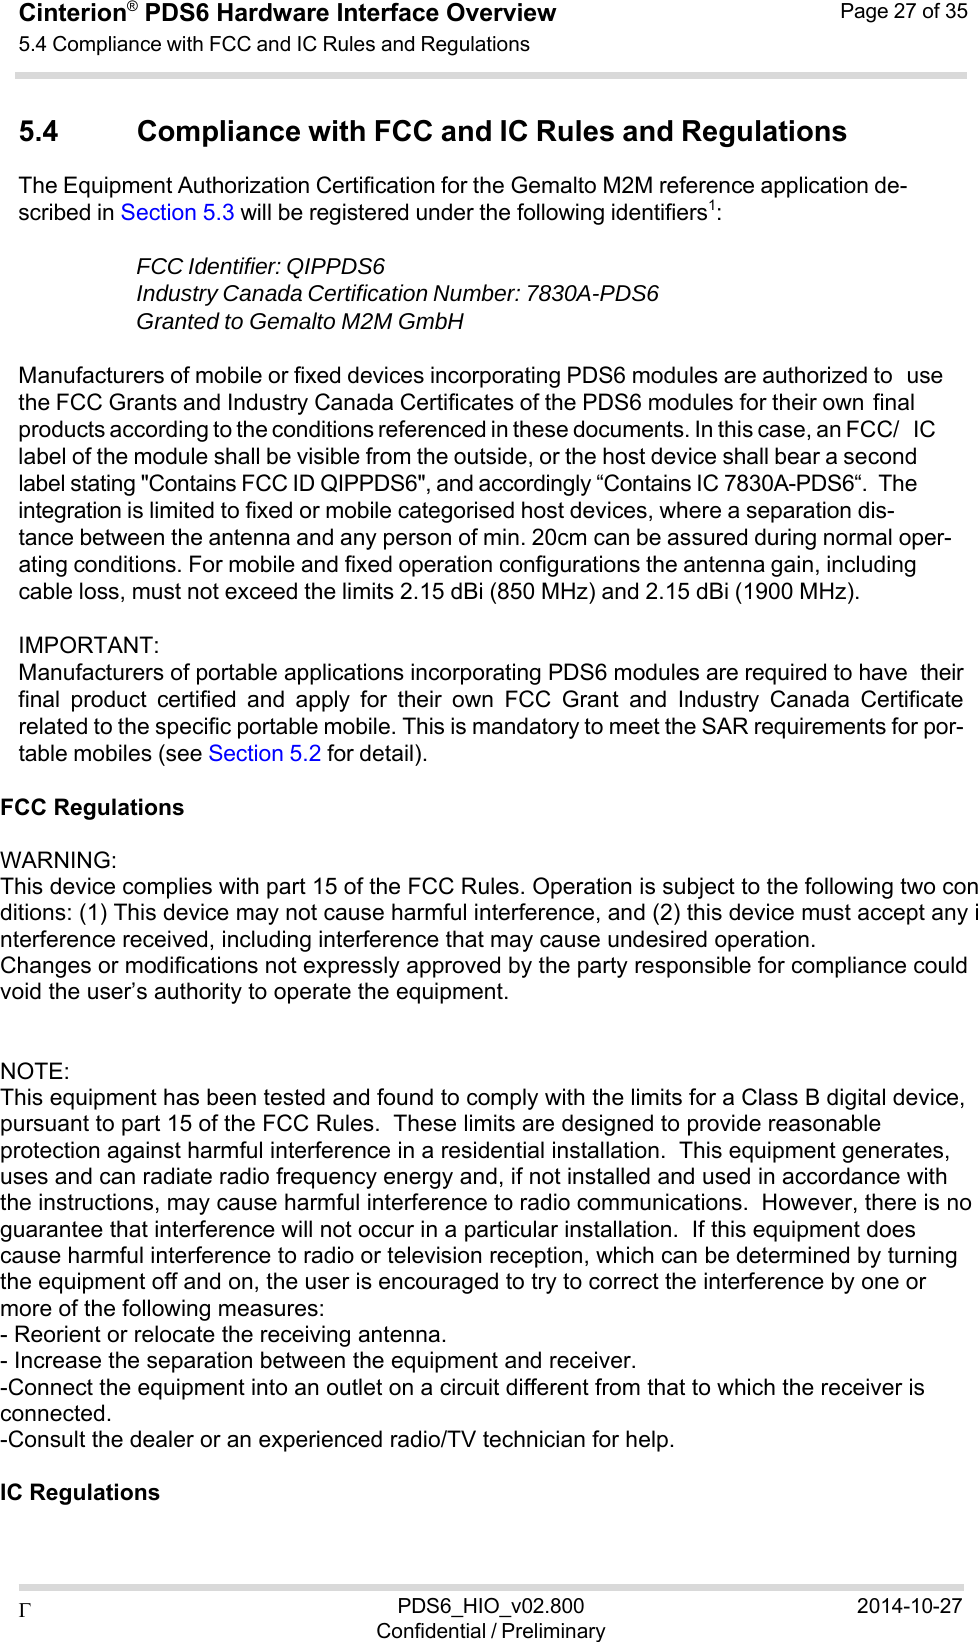  PDS6_HIO_v02.800Confidential / Preliminary2014-10-27Cinterion®  PDS6 Hardware Interface Overview 5.4 Compliance with FCC and IC Rules and Regulations Page 27 of 35   5.4 Compliance with FCC and IC Rules and Regulations The Equipment Authorization Certification for the Gemalto M2M reference application de- scribed in Section 5.3 will be registered under the following identifiers1:  FCC Identifier: QIPPDS6 Industry Canada Certification Number: 7830A-PDS6 Granted to Gemalto M2M GmbH  Manufacturers of mobile or fixed devices incorporating PDS6 modules are authorized to use the FCC Grants and Industry Canada Certificates of the PDS6 modules for their own final products according to the conditions referenced in these documents. In this case, an FCC/ IC label of the module shall be visible from the outside, or the host device shall bear a second label stating &quot;Contains FCC ID QIPPDS6&quot;, and accordingly “Contains IC 7830A-PDS6“. The integration is limited to fixed or mobile categorised host devices, where a separation dis- tance between the antenna and any person of min. 20cm can be assured during normal oper- ating conditions. For mobile and fixed operation configurations the antenna gain, including cable loss, must not exceed the limits 2.15 dBi (850 MHz) and 2.15 dBi (1900 MHz).  IMPORTANT: Manufacturers of portable applications incorporating PDS6 modules are required to have their final  product  certified  and  apply  for  their  own  FCC  Grant  and  Industry  Canada  Certificate related to the specific portable mobile. This is mandatory to meet the SAR requirements for por- table mobiles (see Section 5.2 for detail).  FCC Regulations    WARNING: This device complies with part 15 of the FCC Rules. Operation is subject to the following two conditions: (1) This device may not cause harmful interference, and (2) this device must accept any interference received, including interference that may cause undesired operation. Changes or modifications not expressly approved by the party responsible for compliance could void the user’s authority to operate the equipment.    NOTE:  This equipment has been tested and found to comply with the limits for a Class B digital device, pursuant to part 15 of the FCC Rules.  These limits are designed to provide reasonable protection against harmful interference in a residential installation.  This equipment generates, uses and can radiate radio frequency energy and, if not installed and used in accordance with the instructions, may cause harmful interference to radio communications.  However, there is no guarantee that interference will not occur in a particular installation.  If this equipment does cause harmful interference to radio or television reception, which can be determined by turning the equipment off and on, the user is encouraged to try to correct the interference by one or more of the following measures: - Reorient or relocate the receiving antenna. - Increase the separation between the equipment and receiver. -Connect the equipment into an outlet on a circuit different from that to which the receiver is connected. -Consult the dealer or an experienced radio/TV technician for help.   IC Regulations    